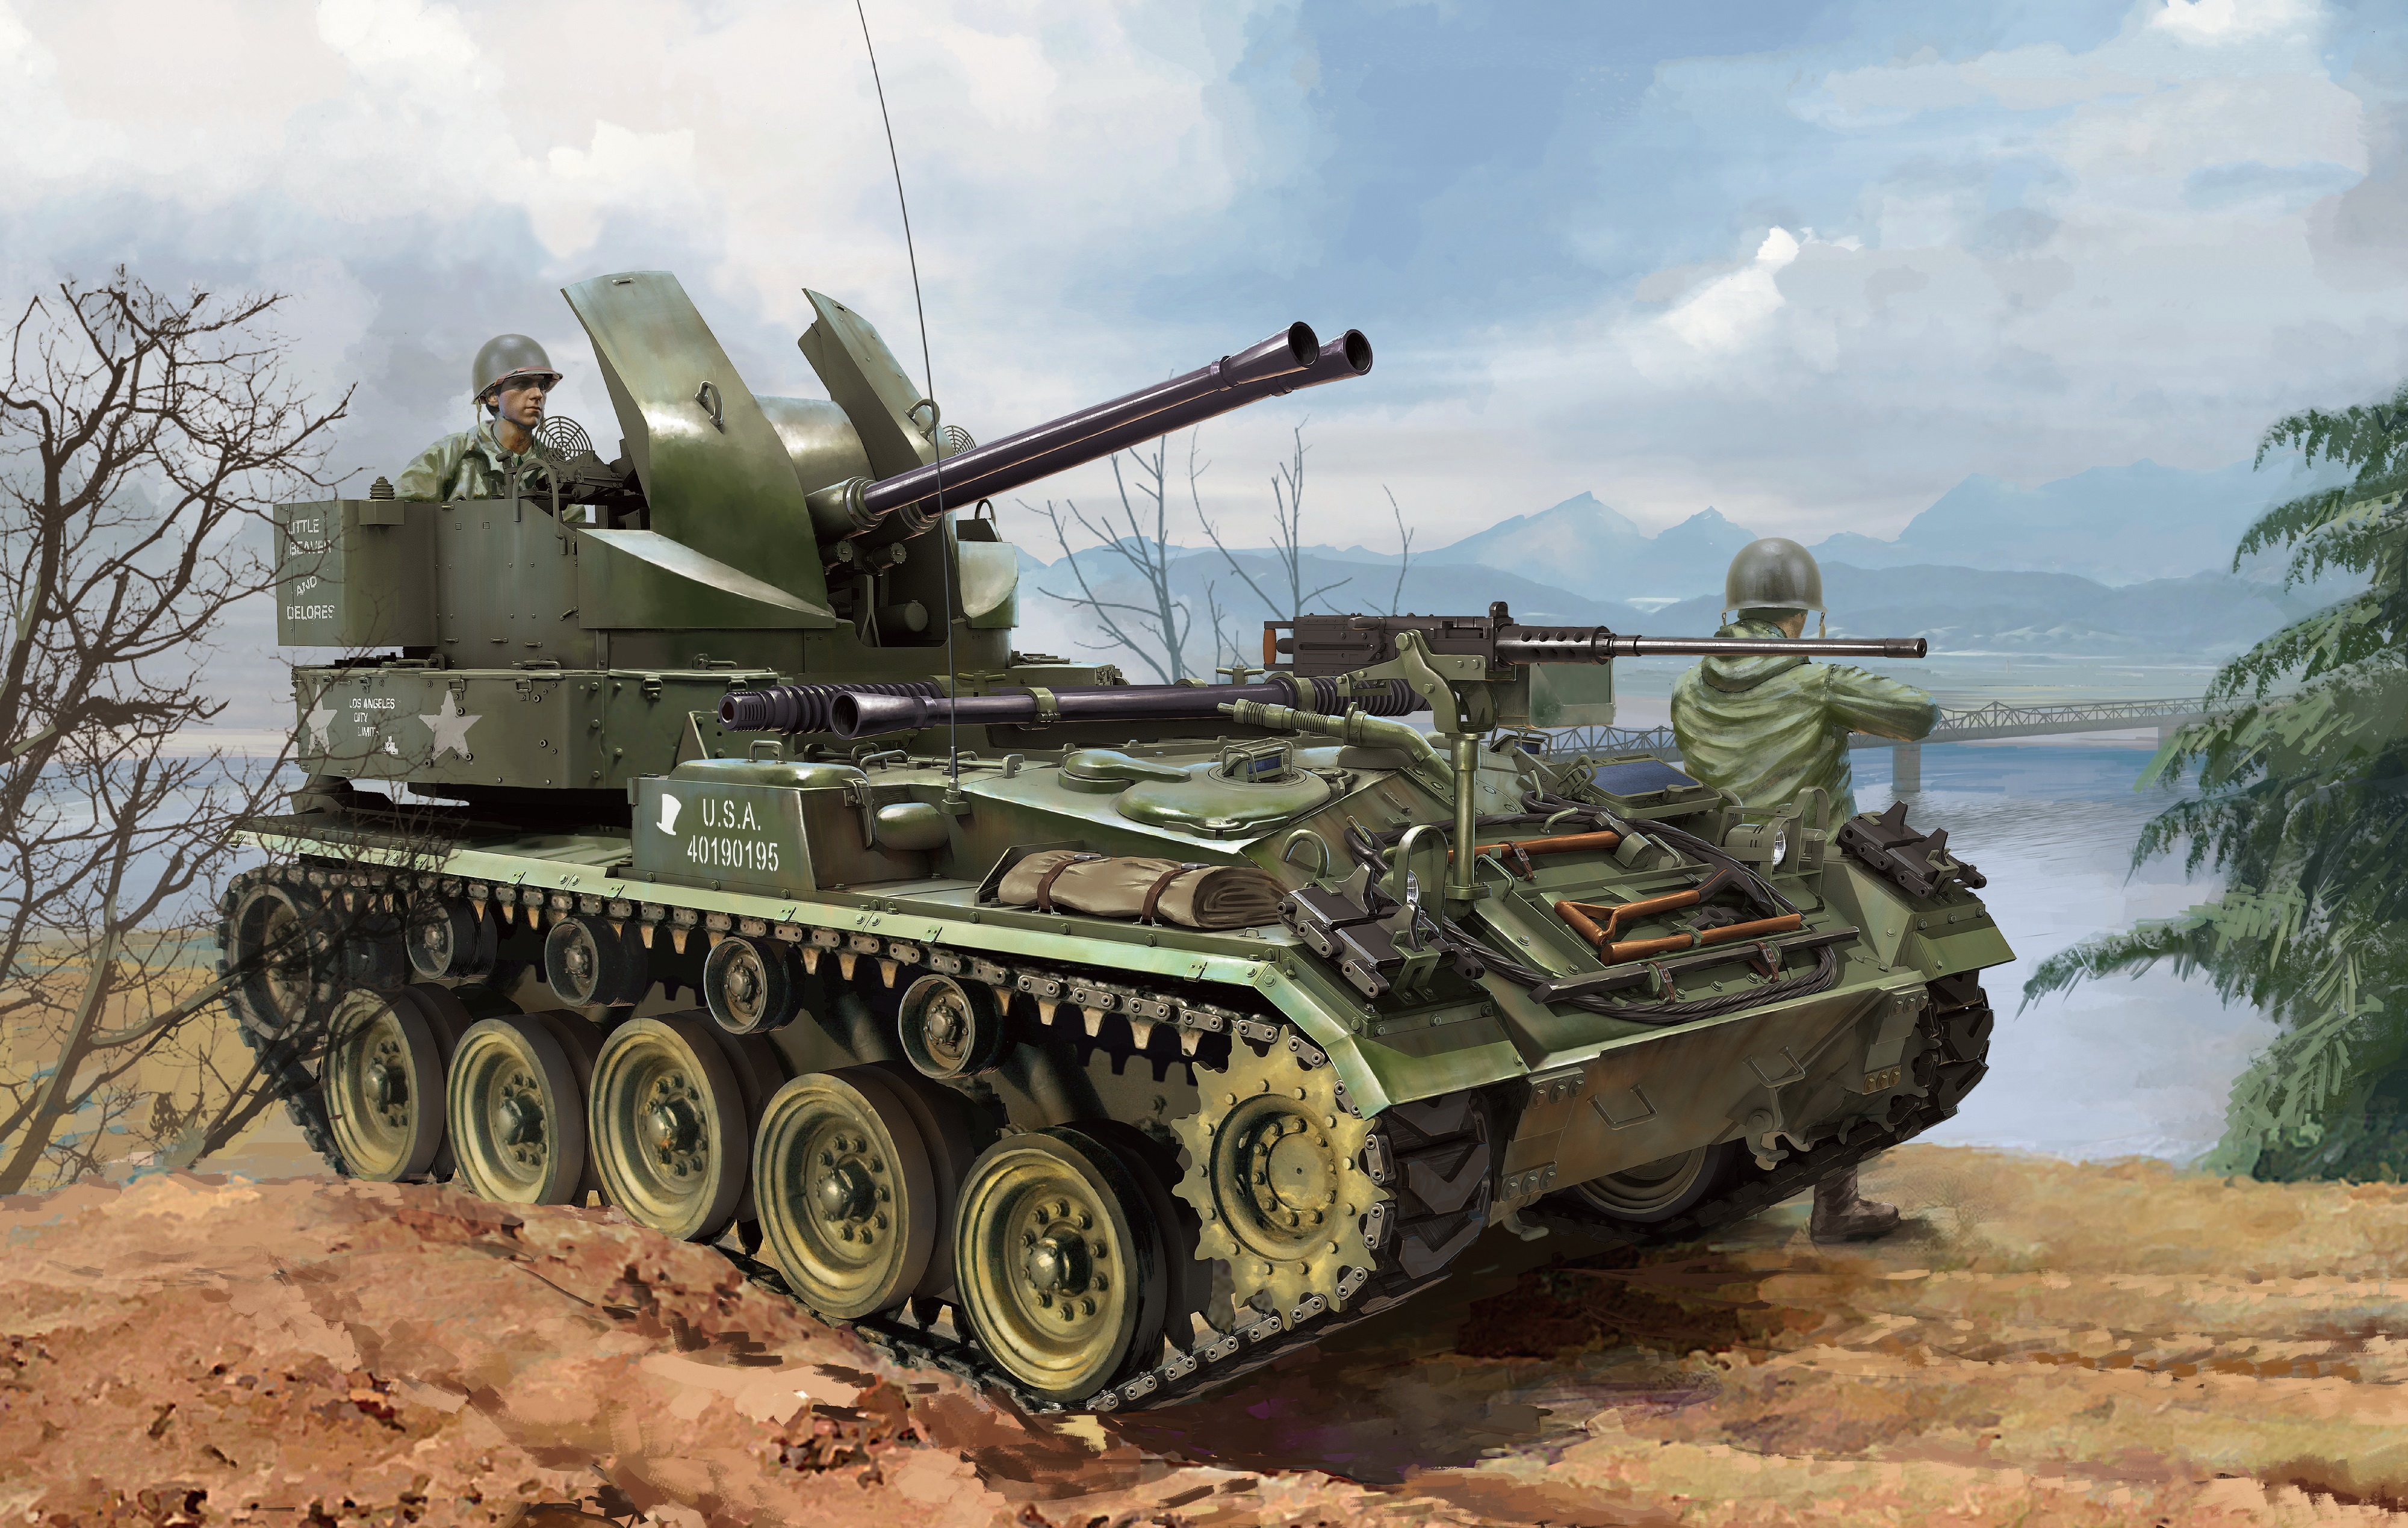 General 4000x2538 tank army military military vehicle artwork sky clouds helmet soldier branch water mountains M42 Duster